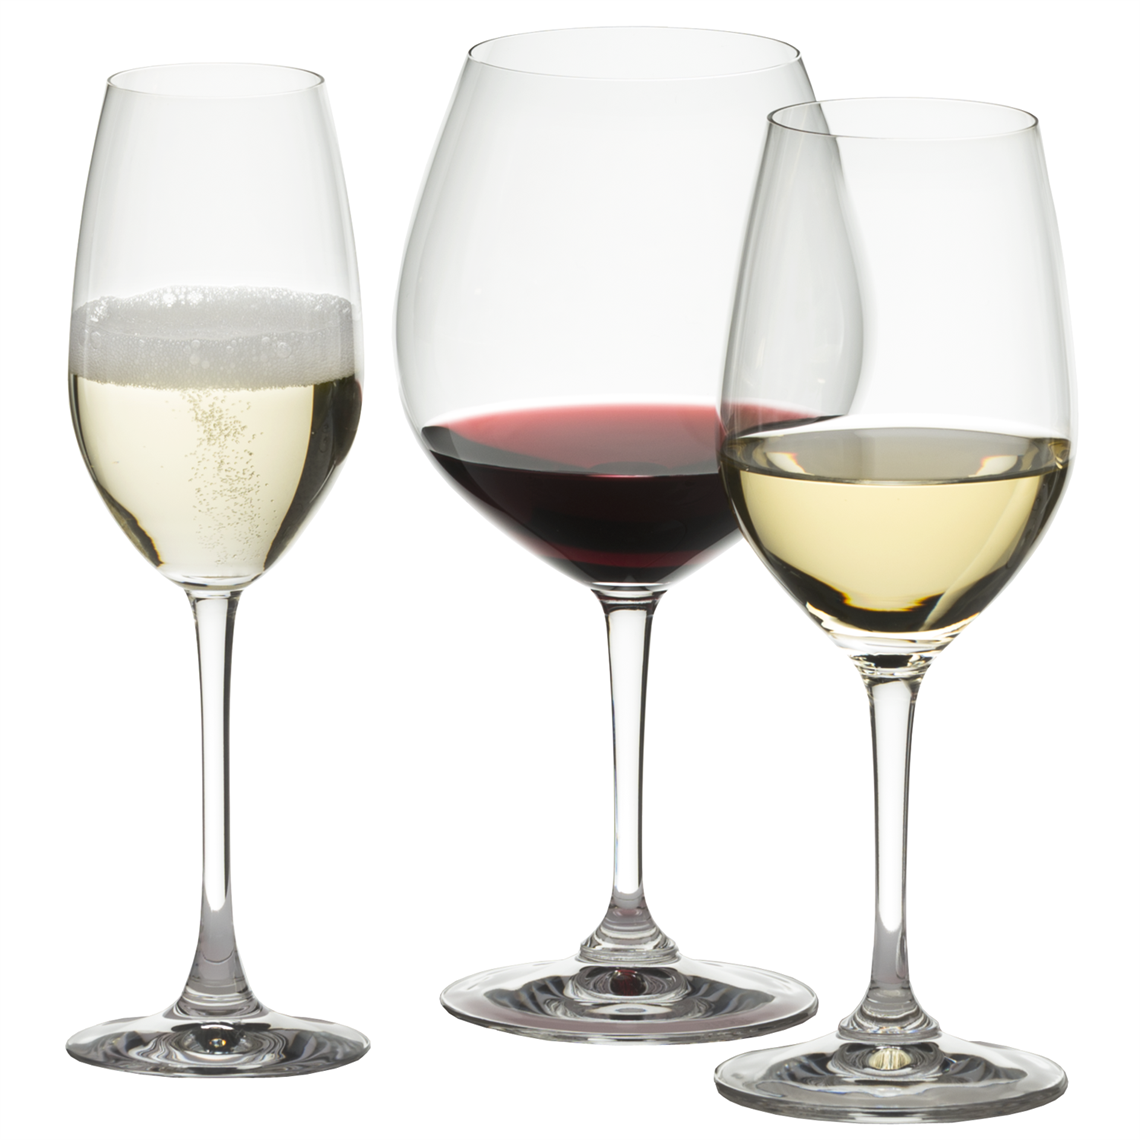 View more zalto from our Restaurant & Trade Glasses range